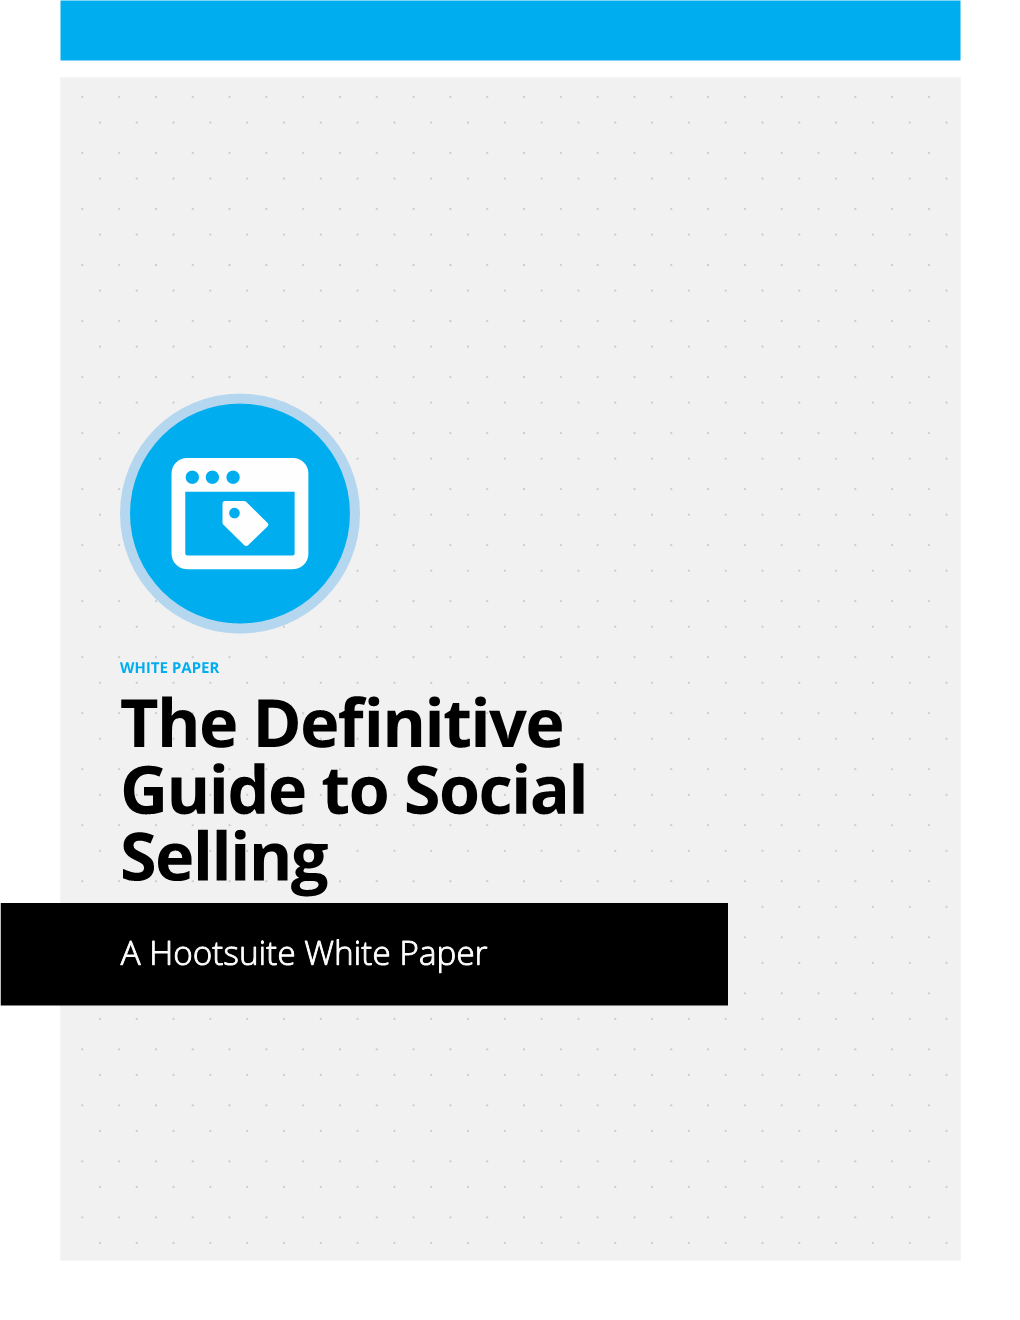 The Definitive Guide to Social Selling